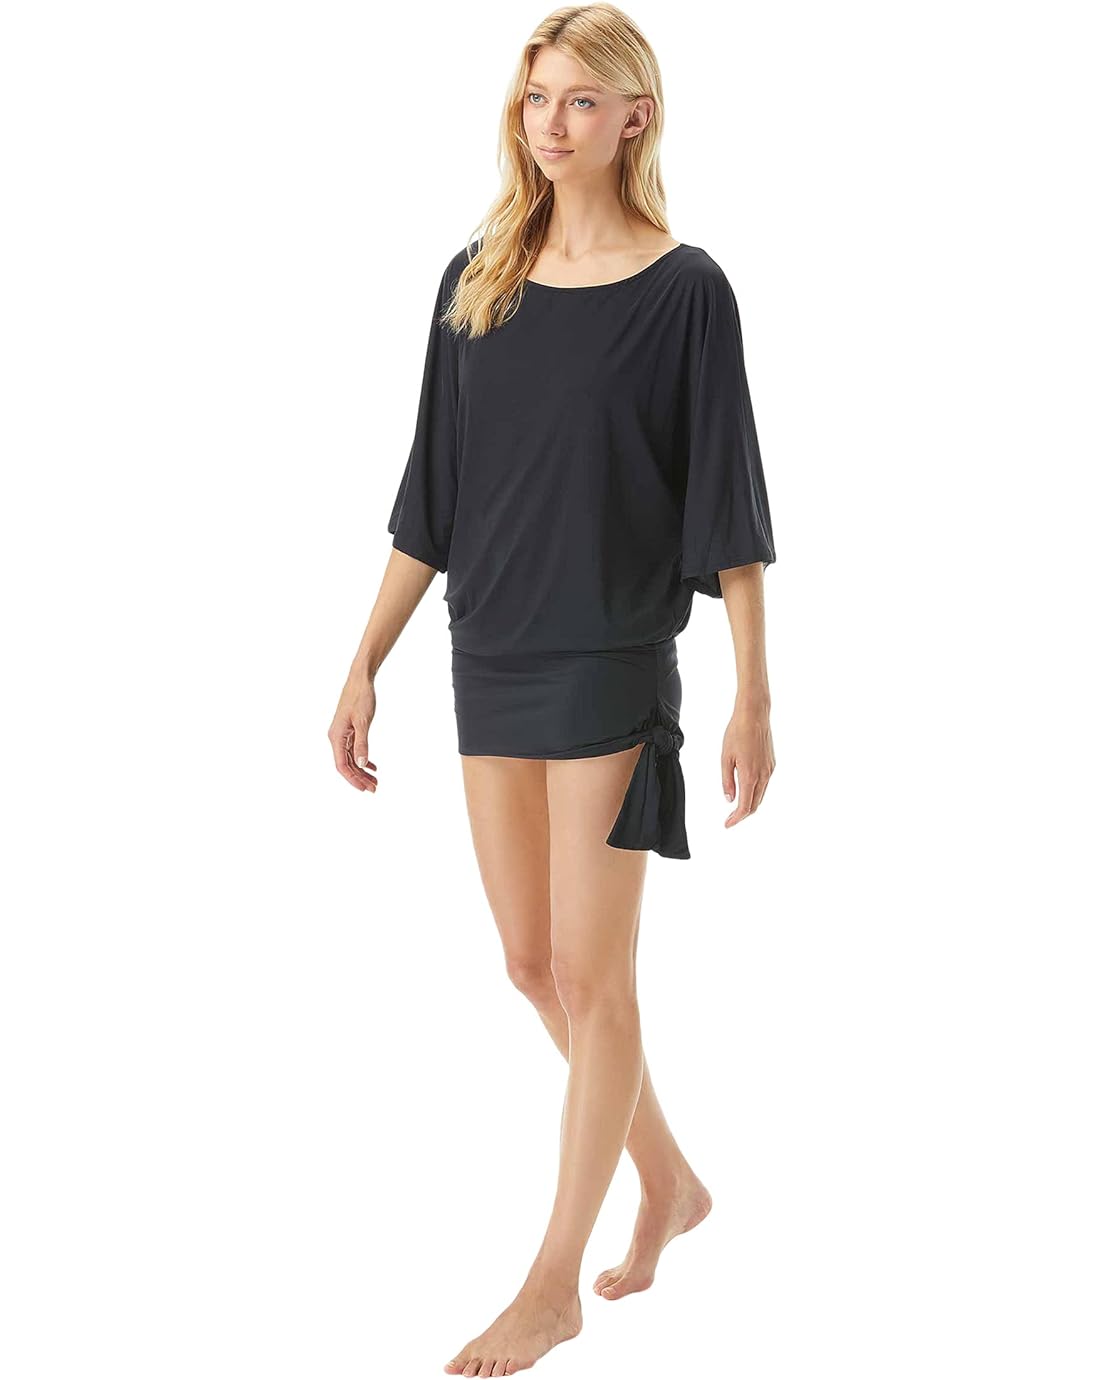 MICHAEL Michael Kors Classic Side Tie Cover-Up